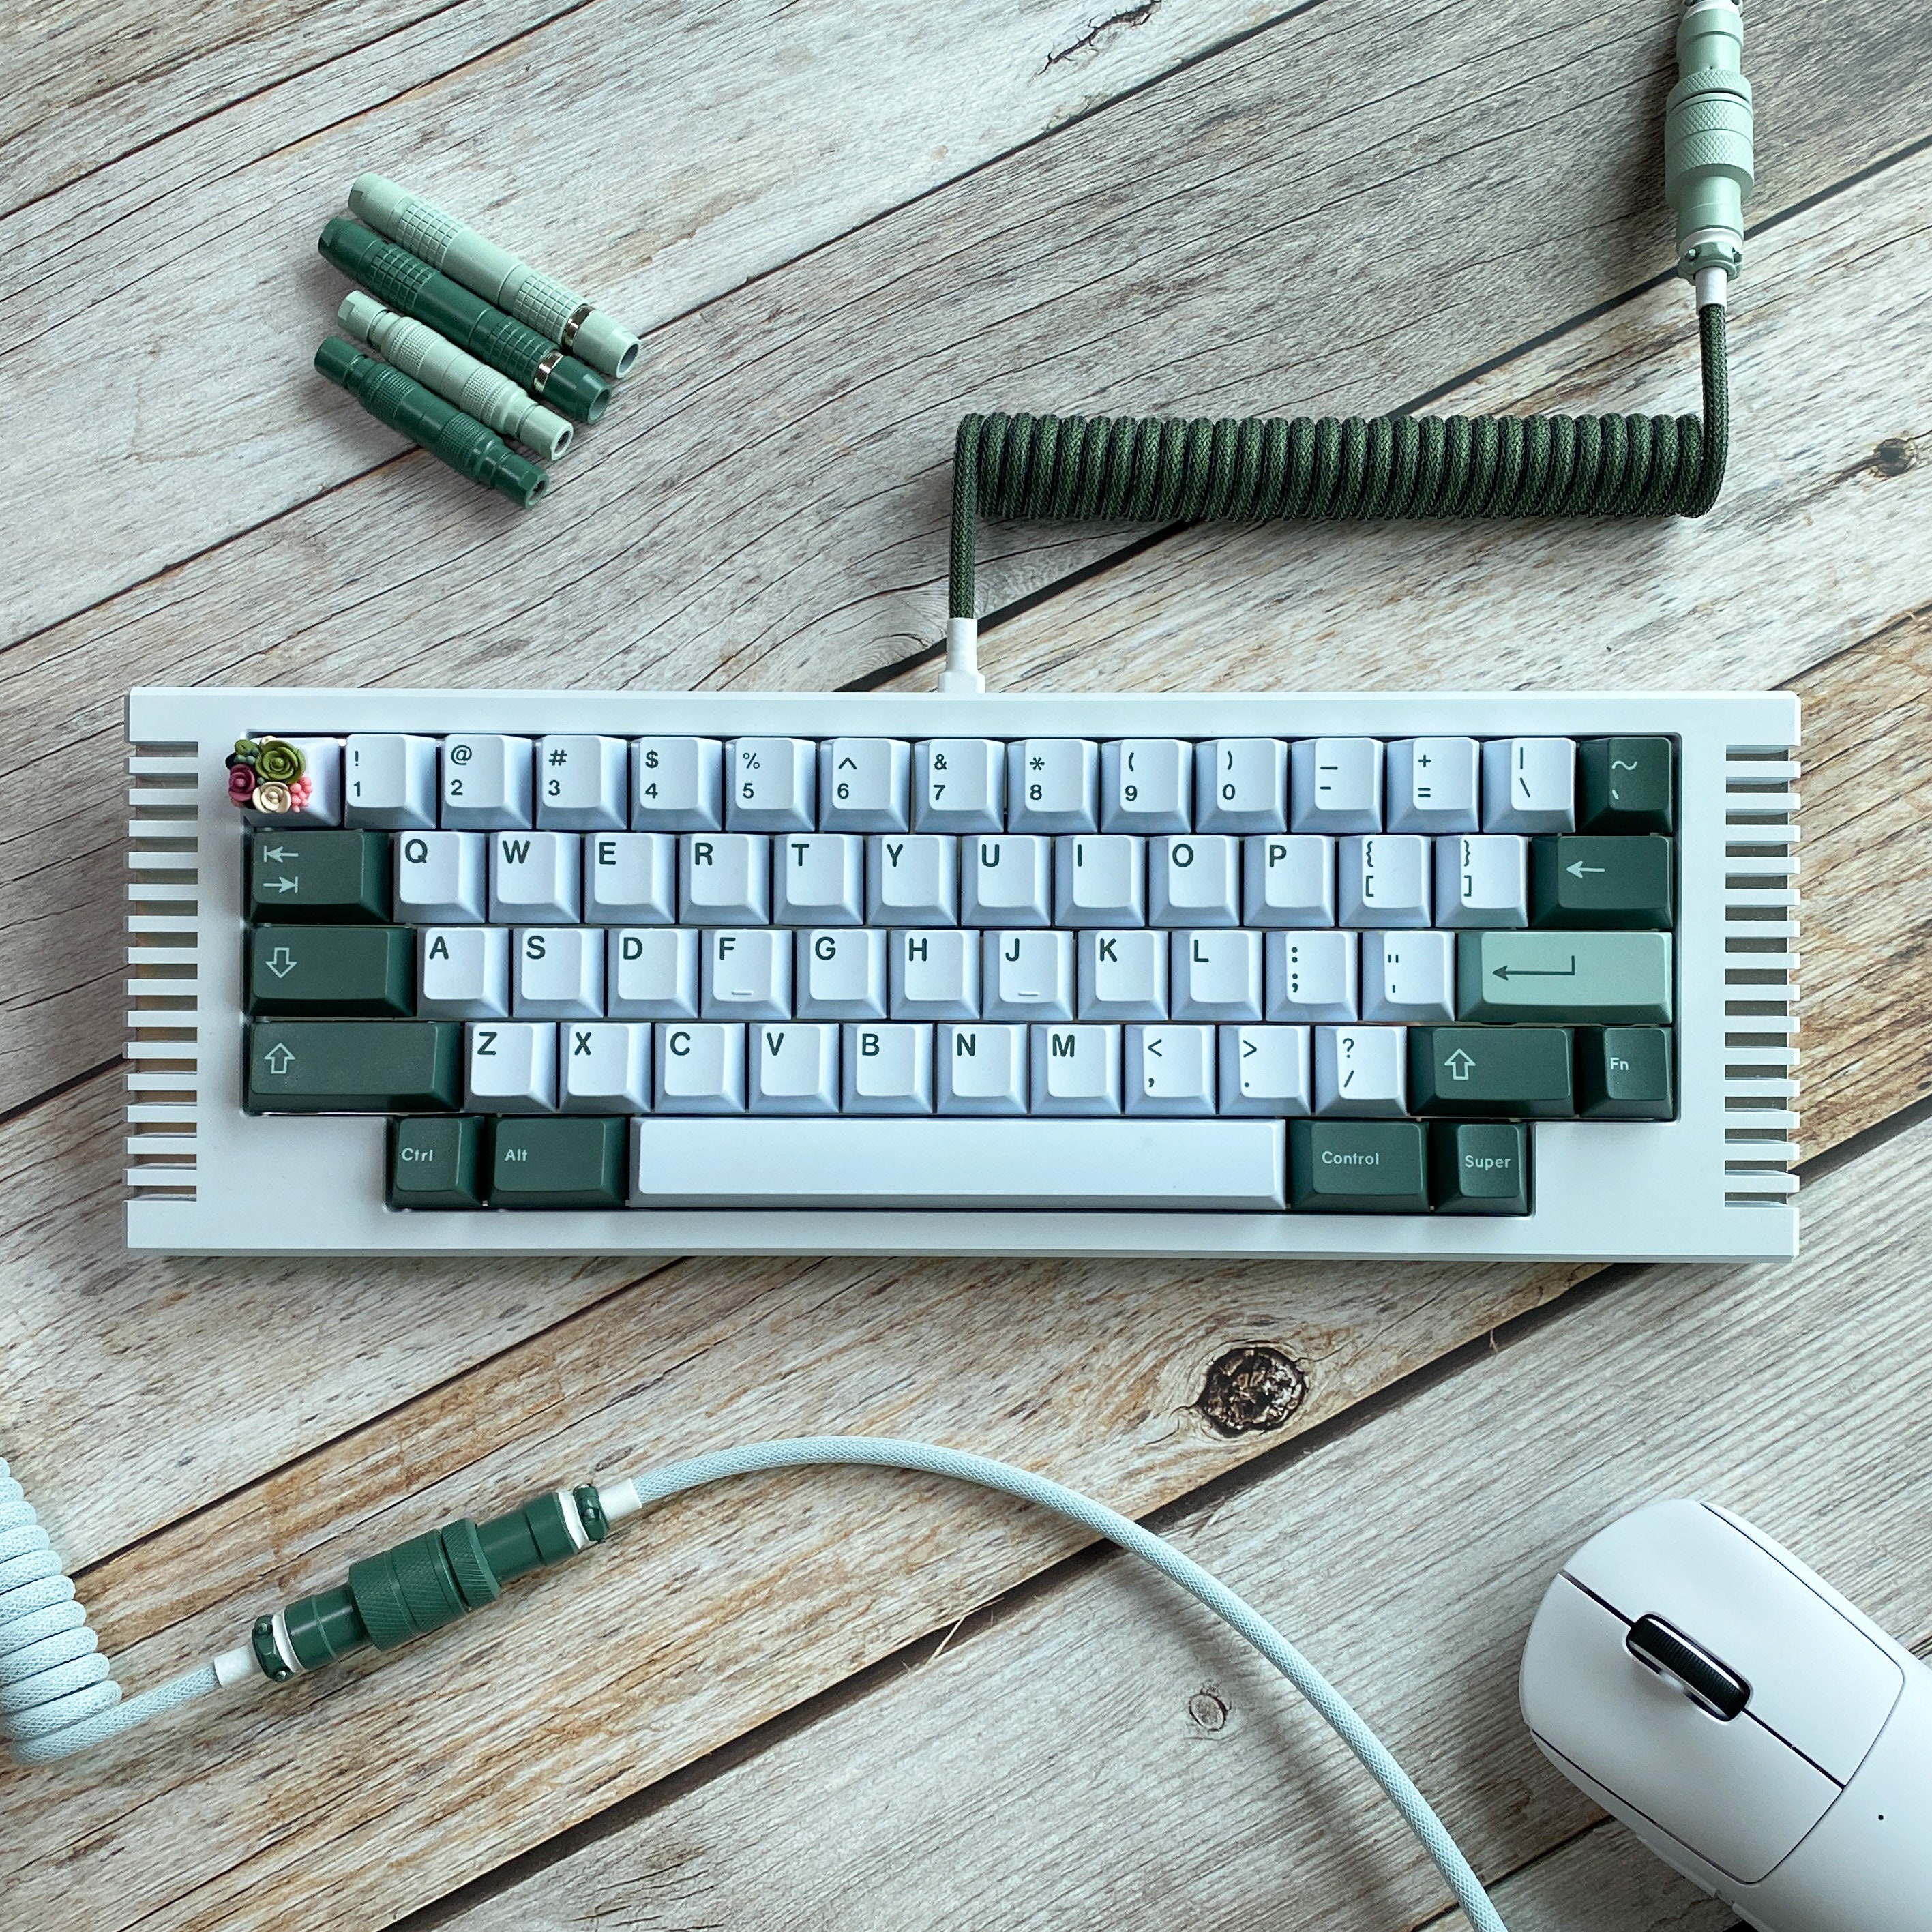 Custom Coiled Keyboard USB Cable With Aviator Connector Botanical